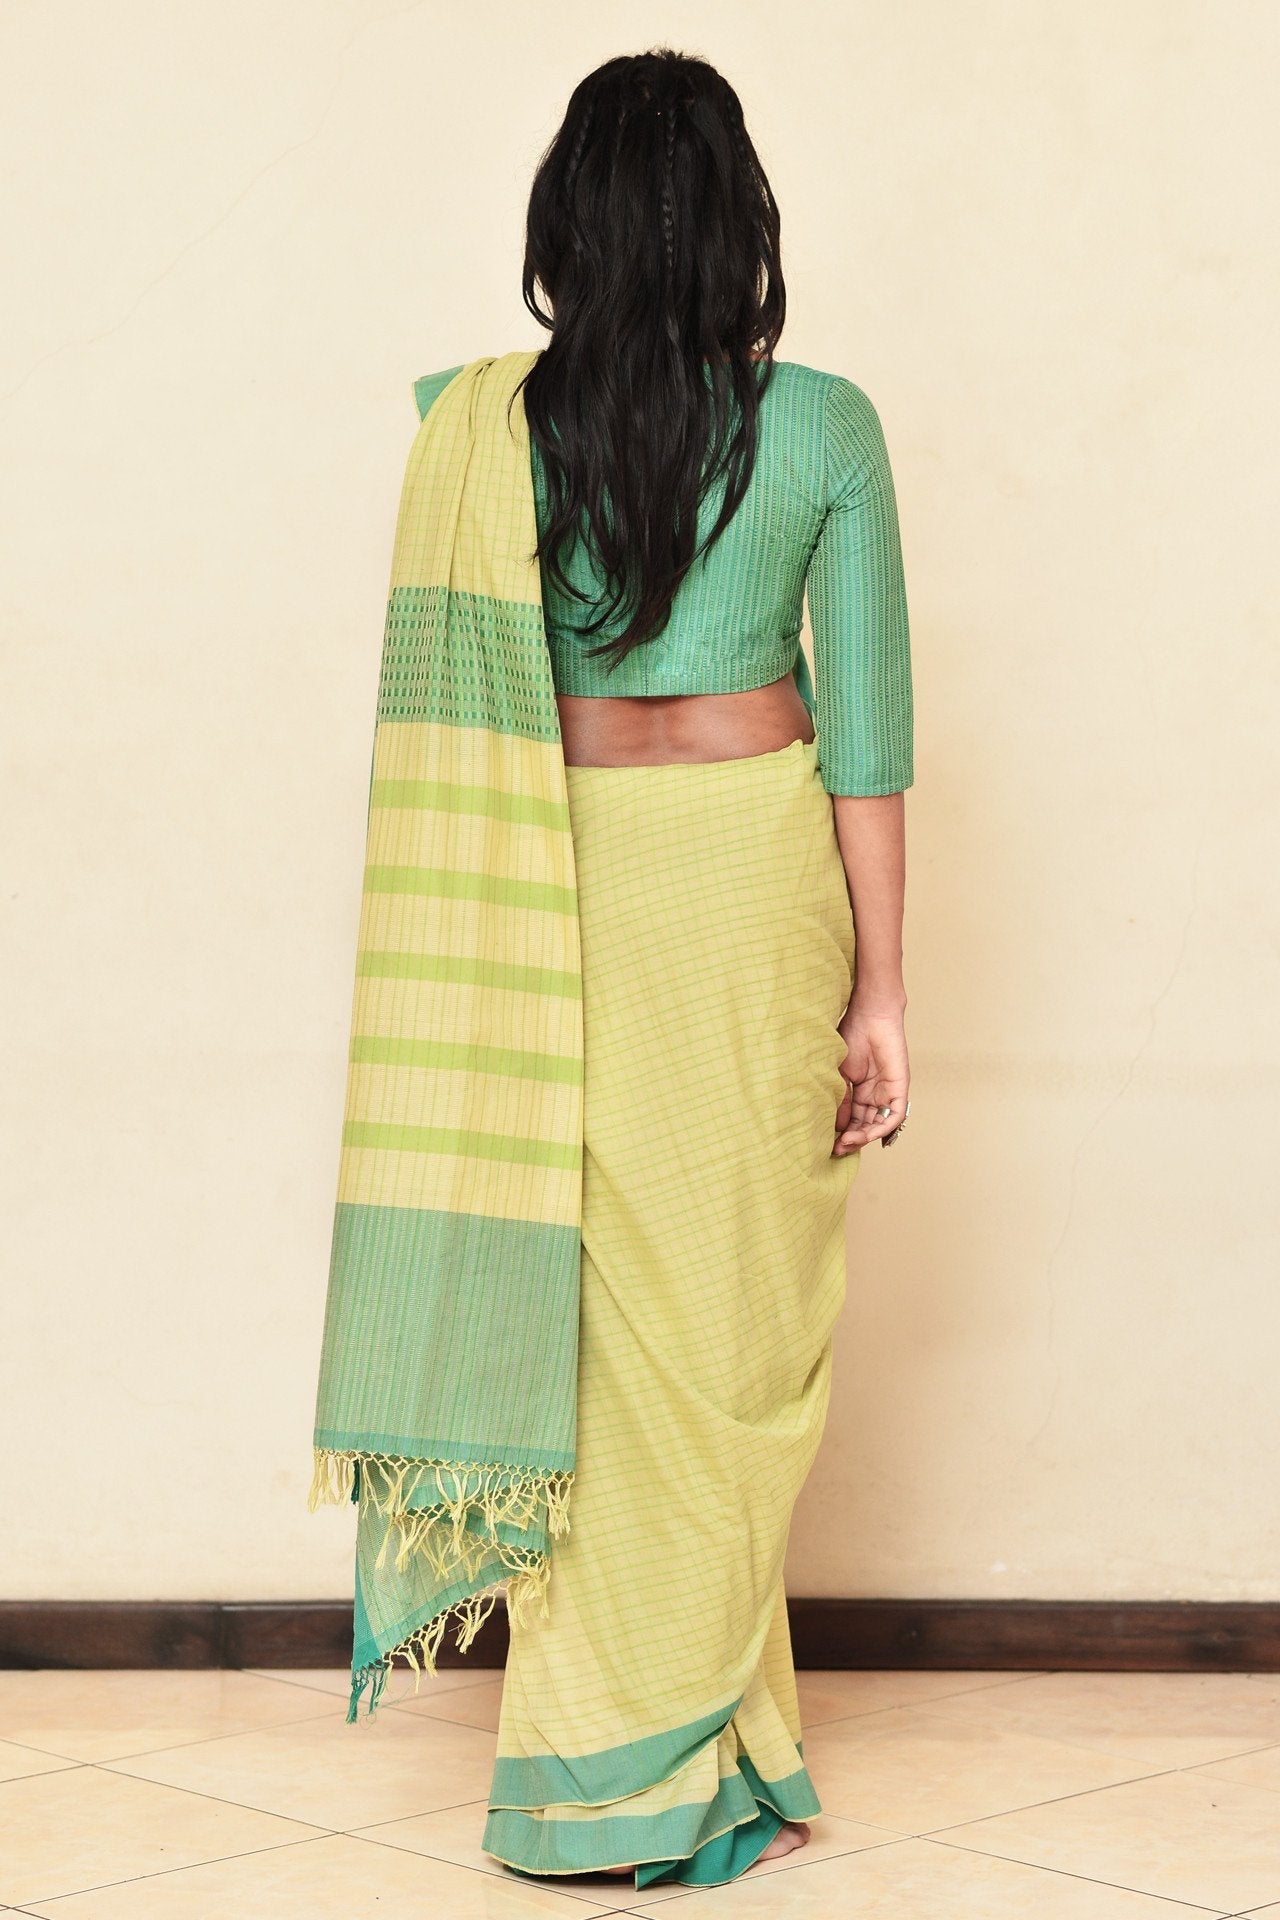 Haritha Rekha Saree - Indian Clothing in Denver, CO, Aurora, CO, Boulder, CO, Fort Collins, CO, Colorado Springs, CO, Parker, CO, Highlands Ranch, CO, Cherry Creek, CO, Centennial, CO, and Longmont, CO. Nationwide shipping USA - India Fashion X